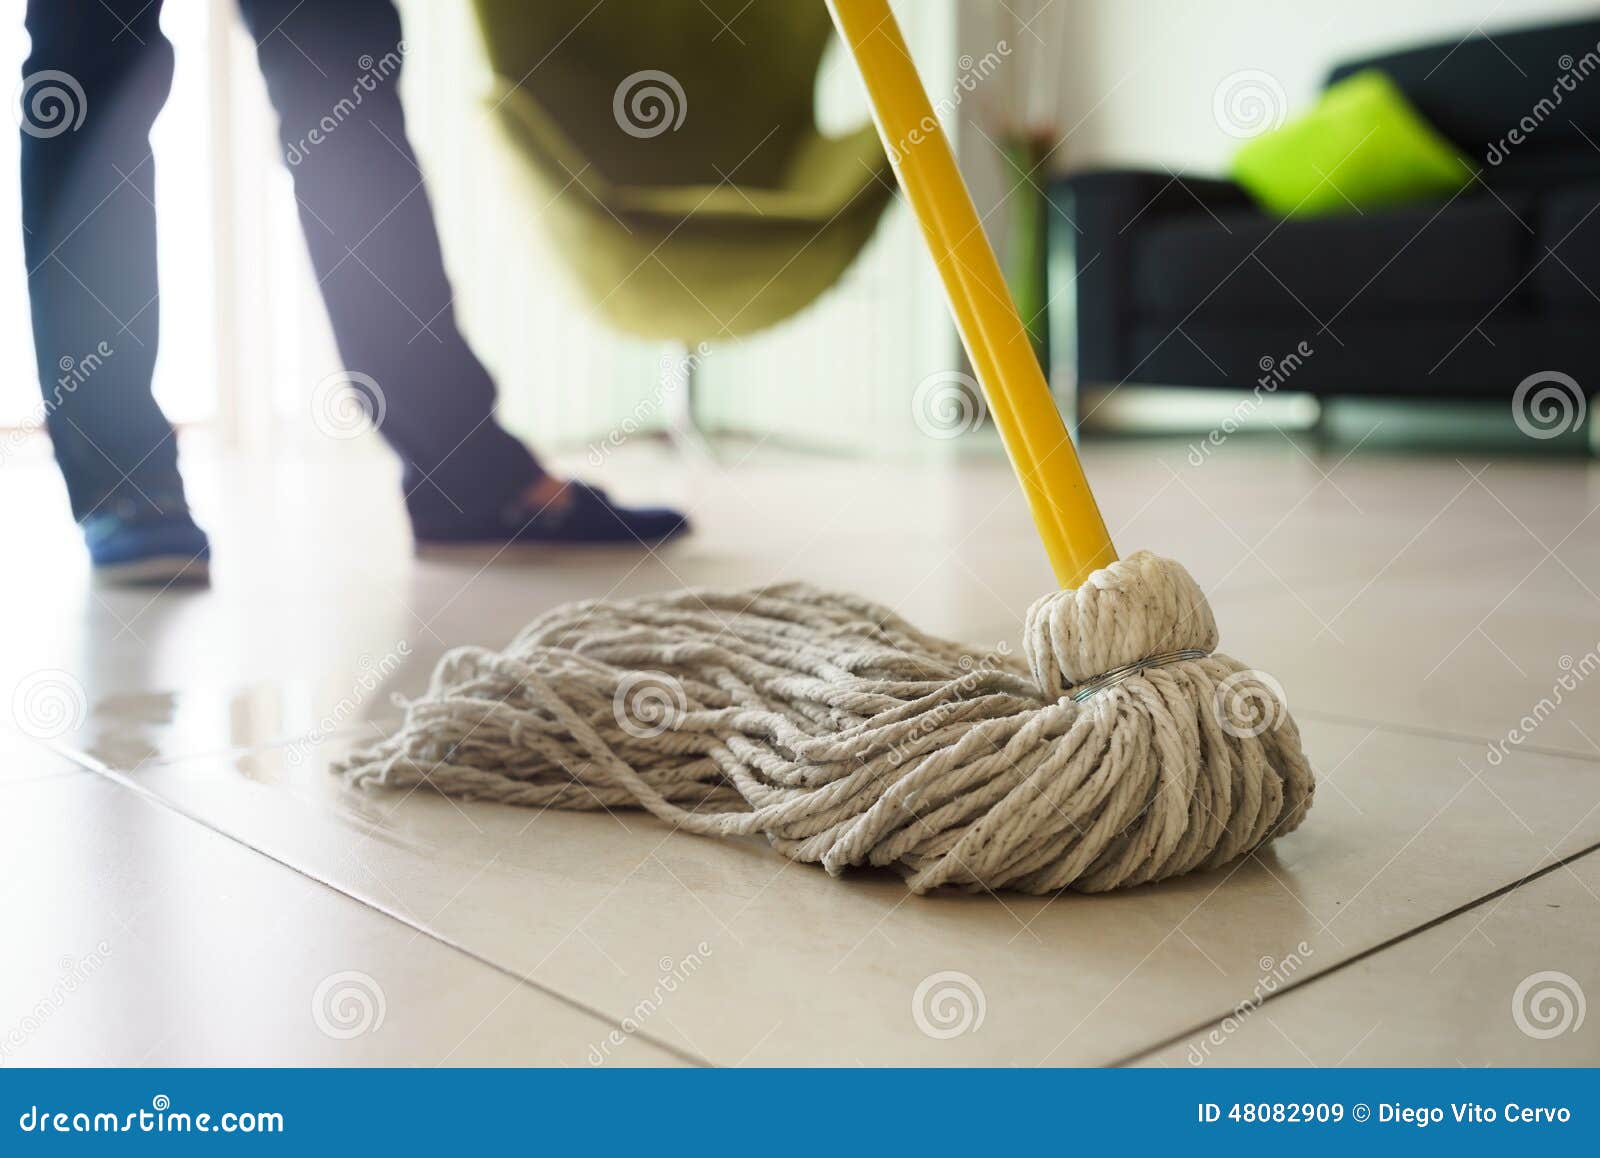 woman doing chores cleaning floor at home focus on mop